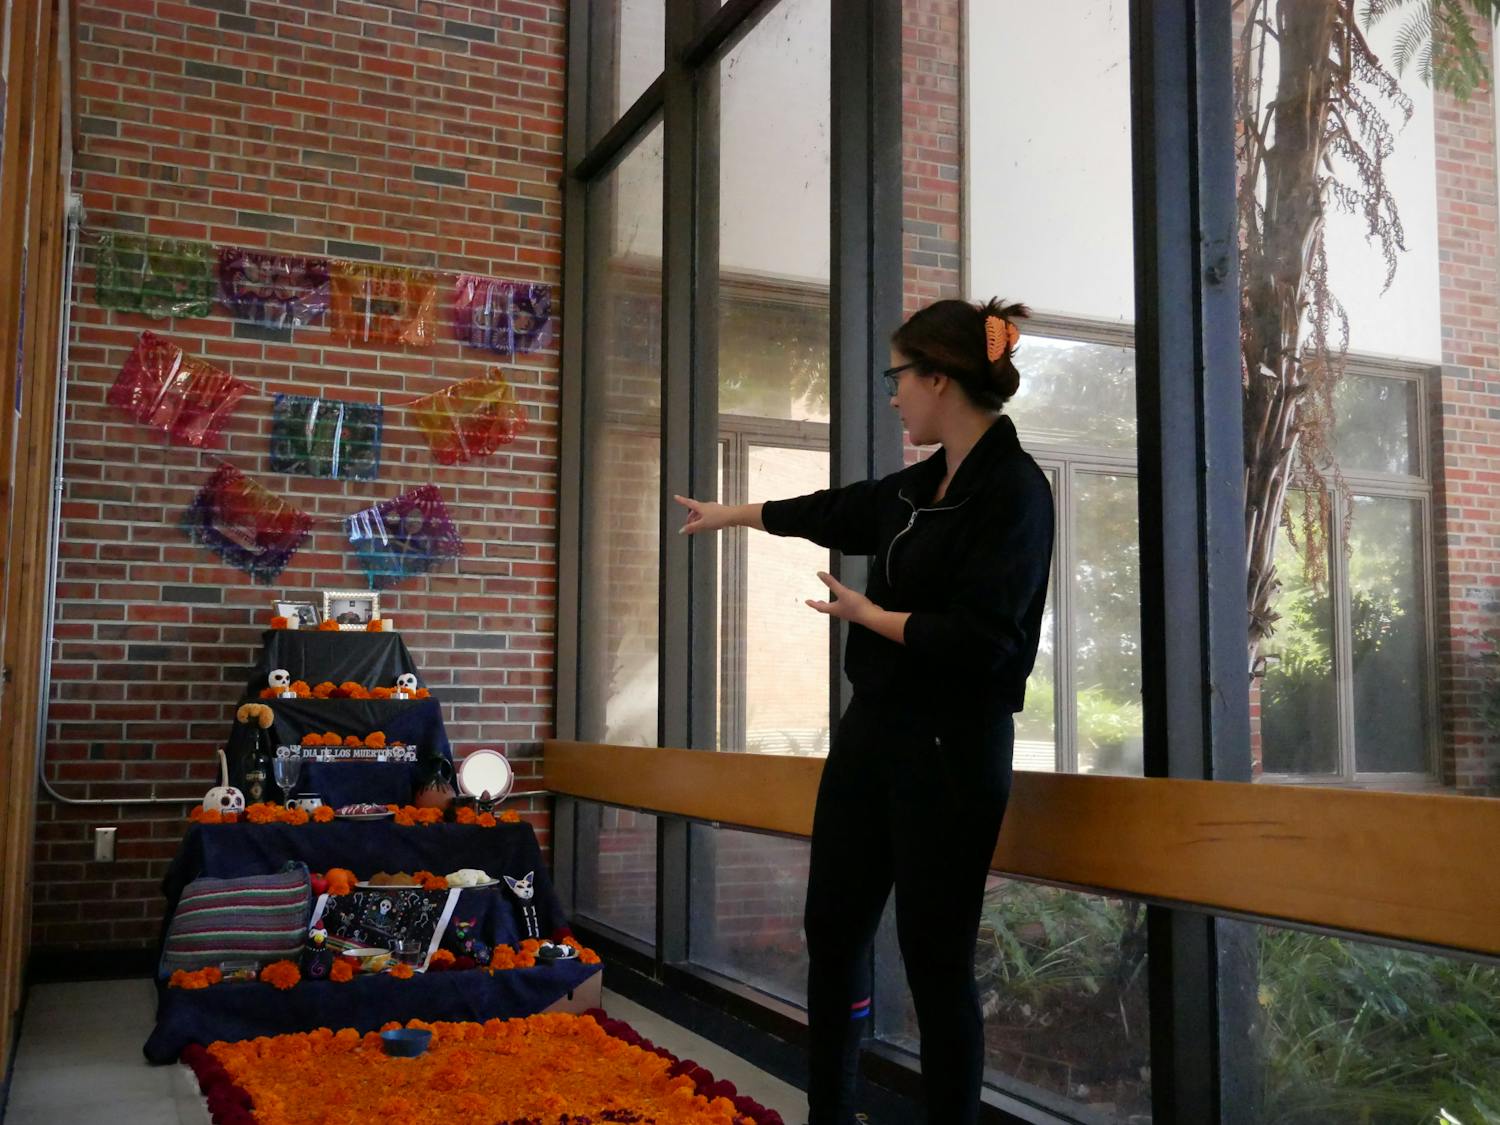 Mexican graduate students at the UF IFAS horticultural sciences lab built the ofrenda pictured at Fifield Hall to celebrate Dia de los Muertos Nov. 1, 2023.